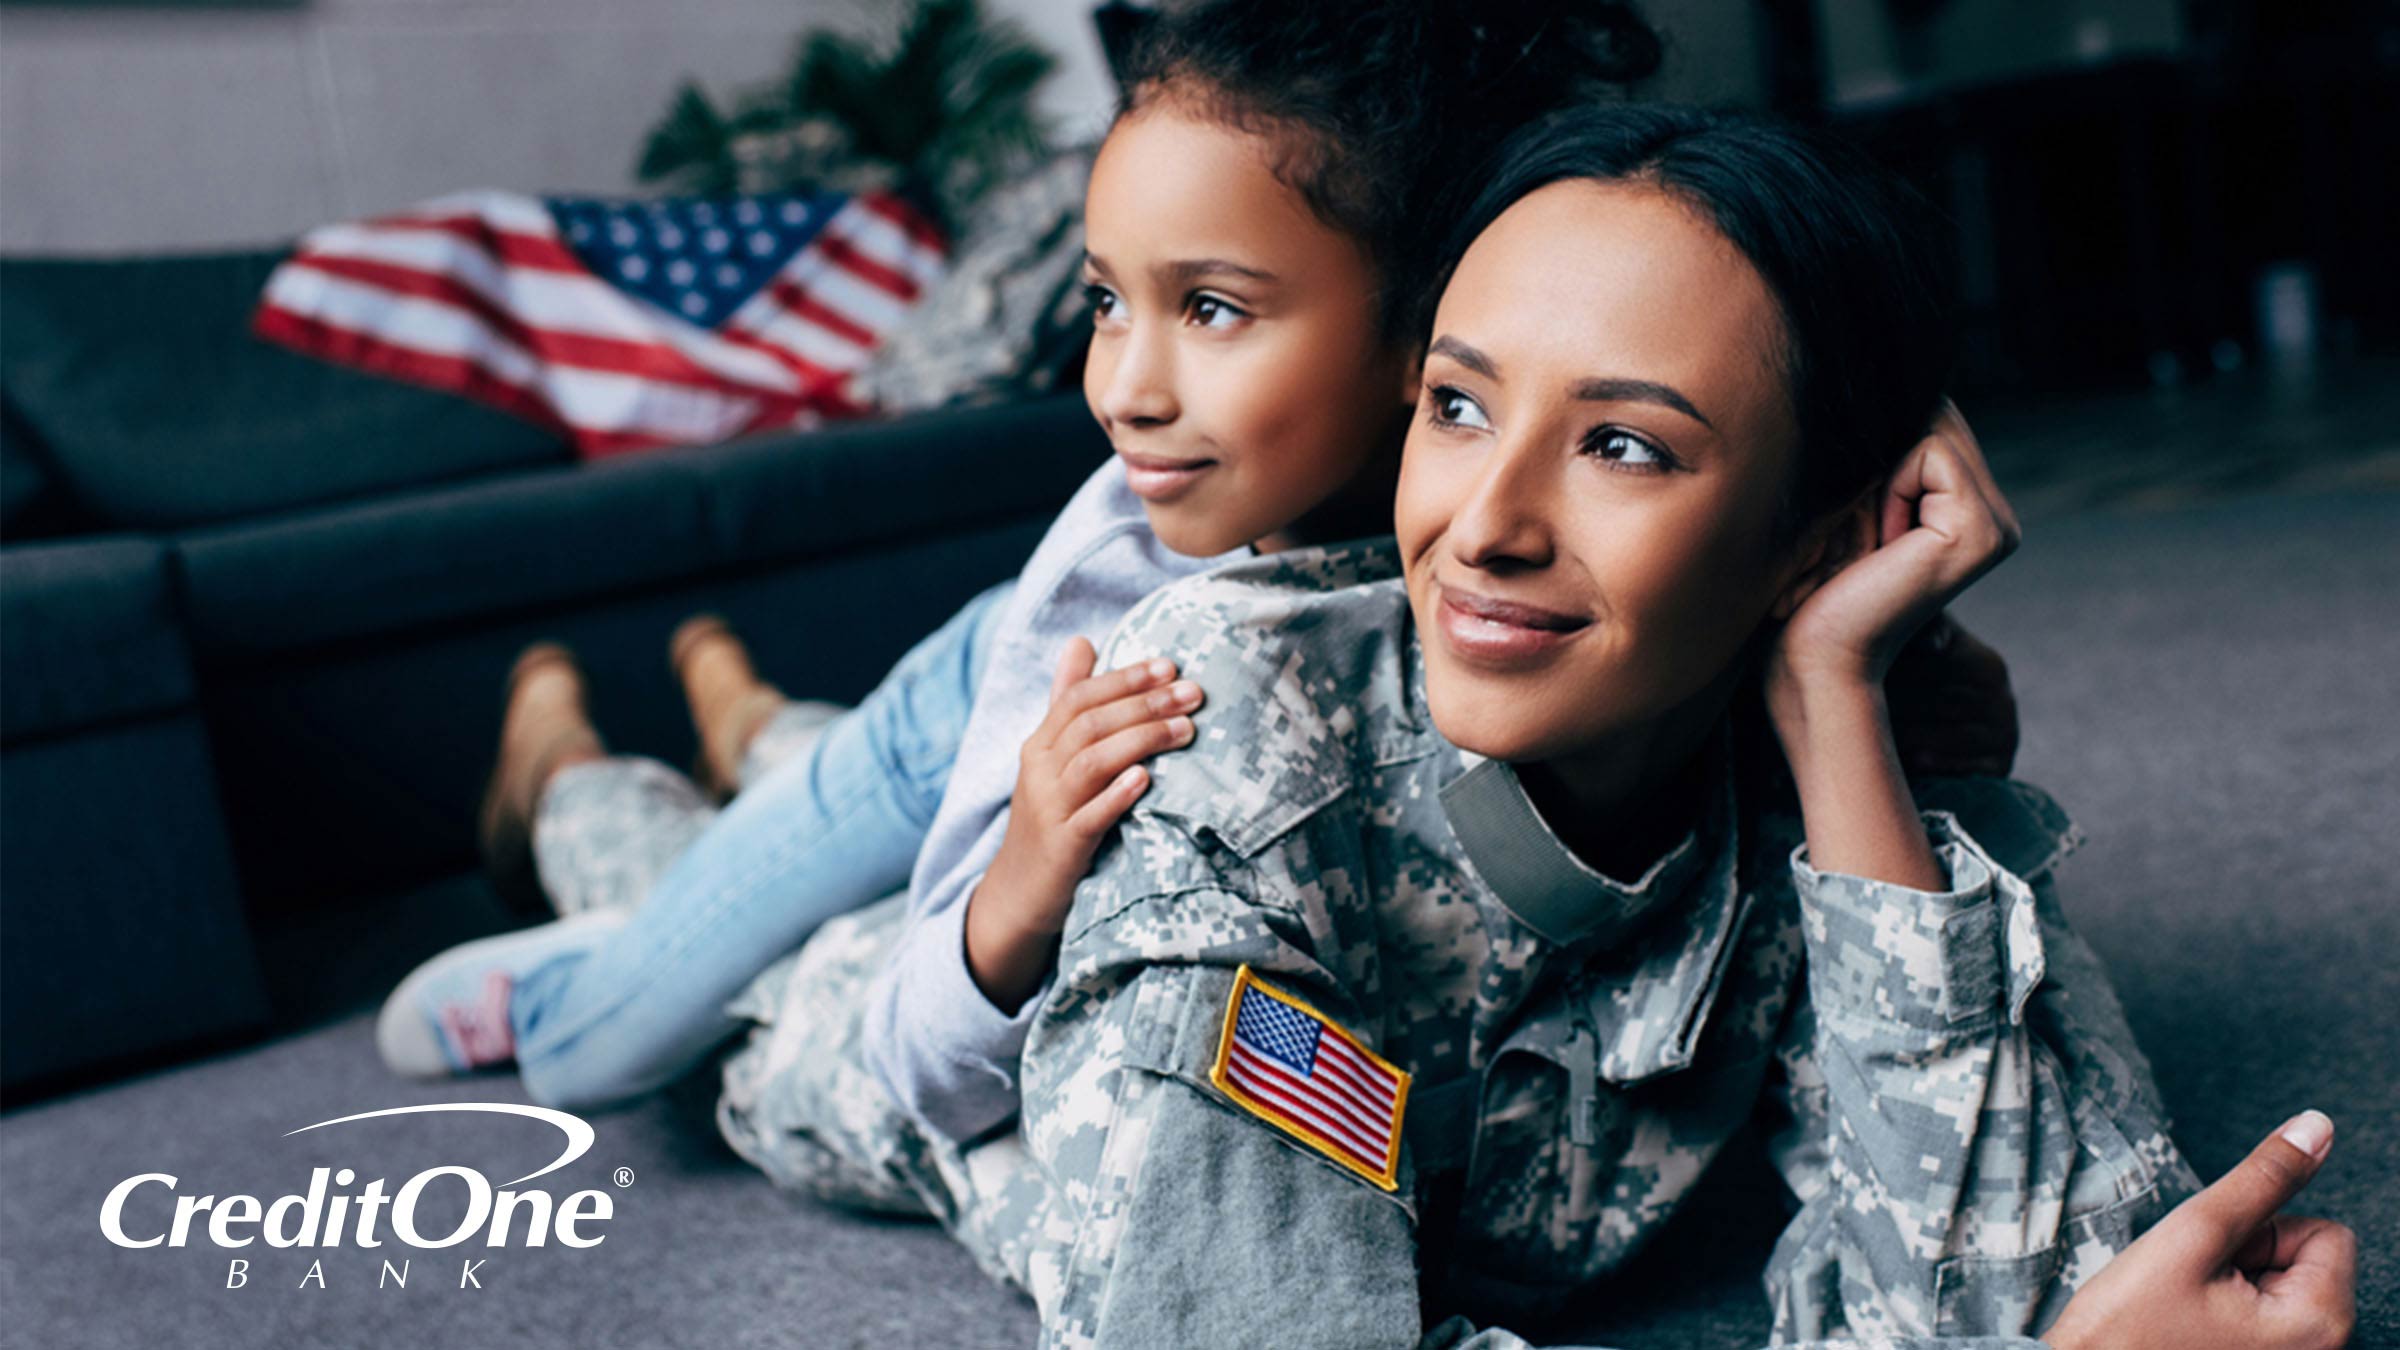 Military veteran and her daughter benefitting from service member financial assistance